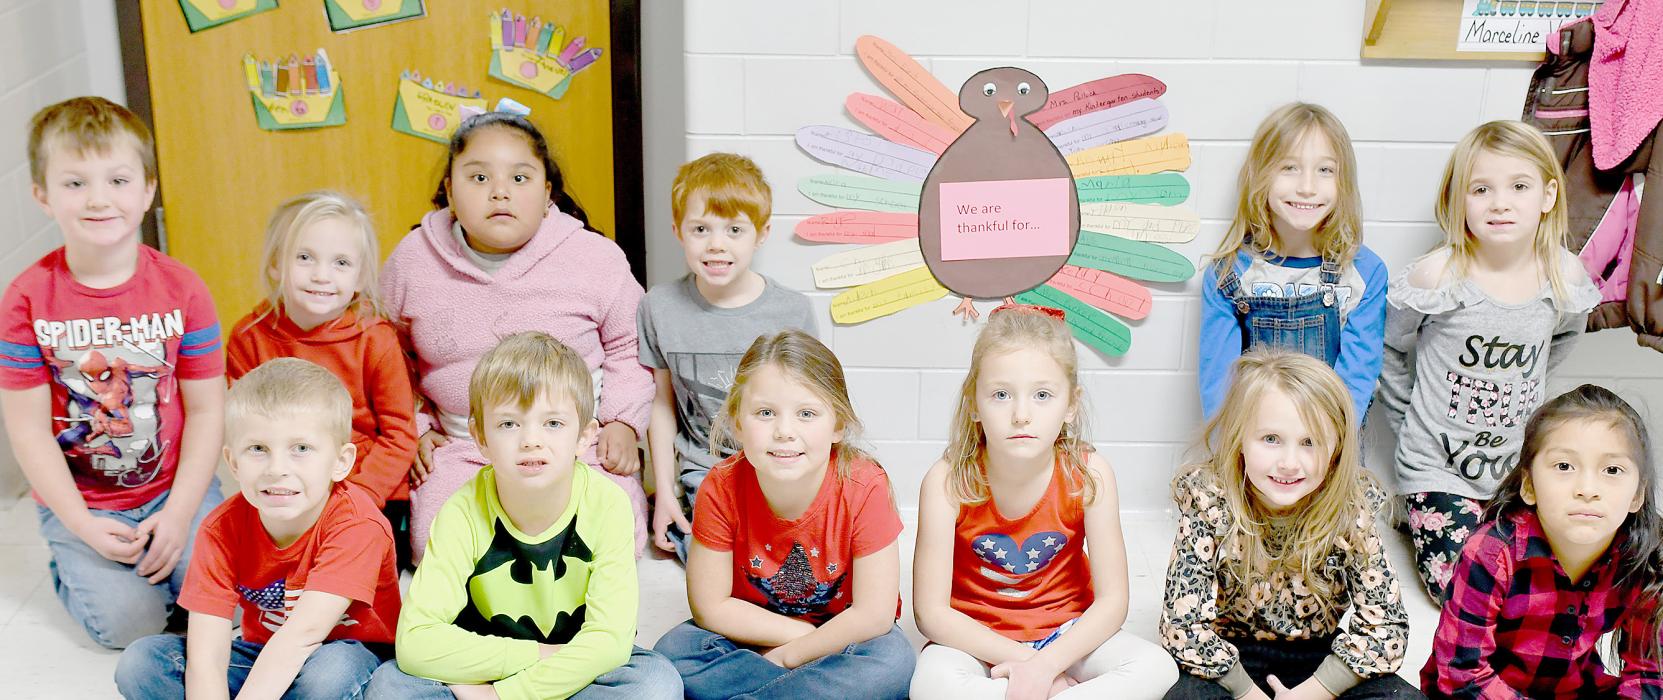 Students in Mrs. Pollocks Class Share What They Are Thankful For